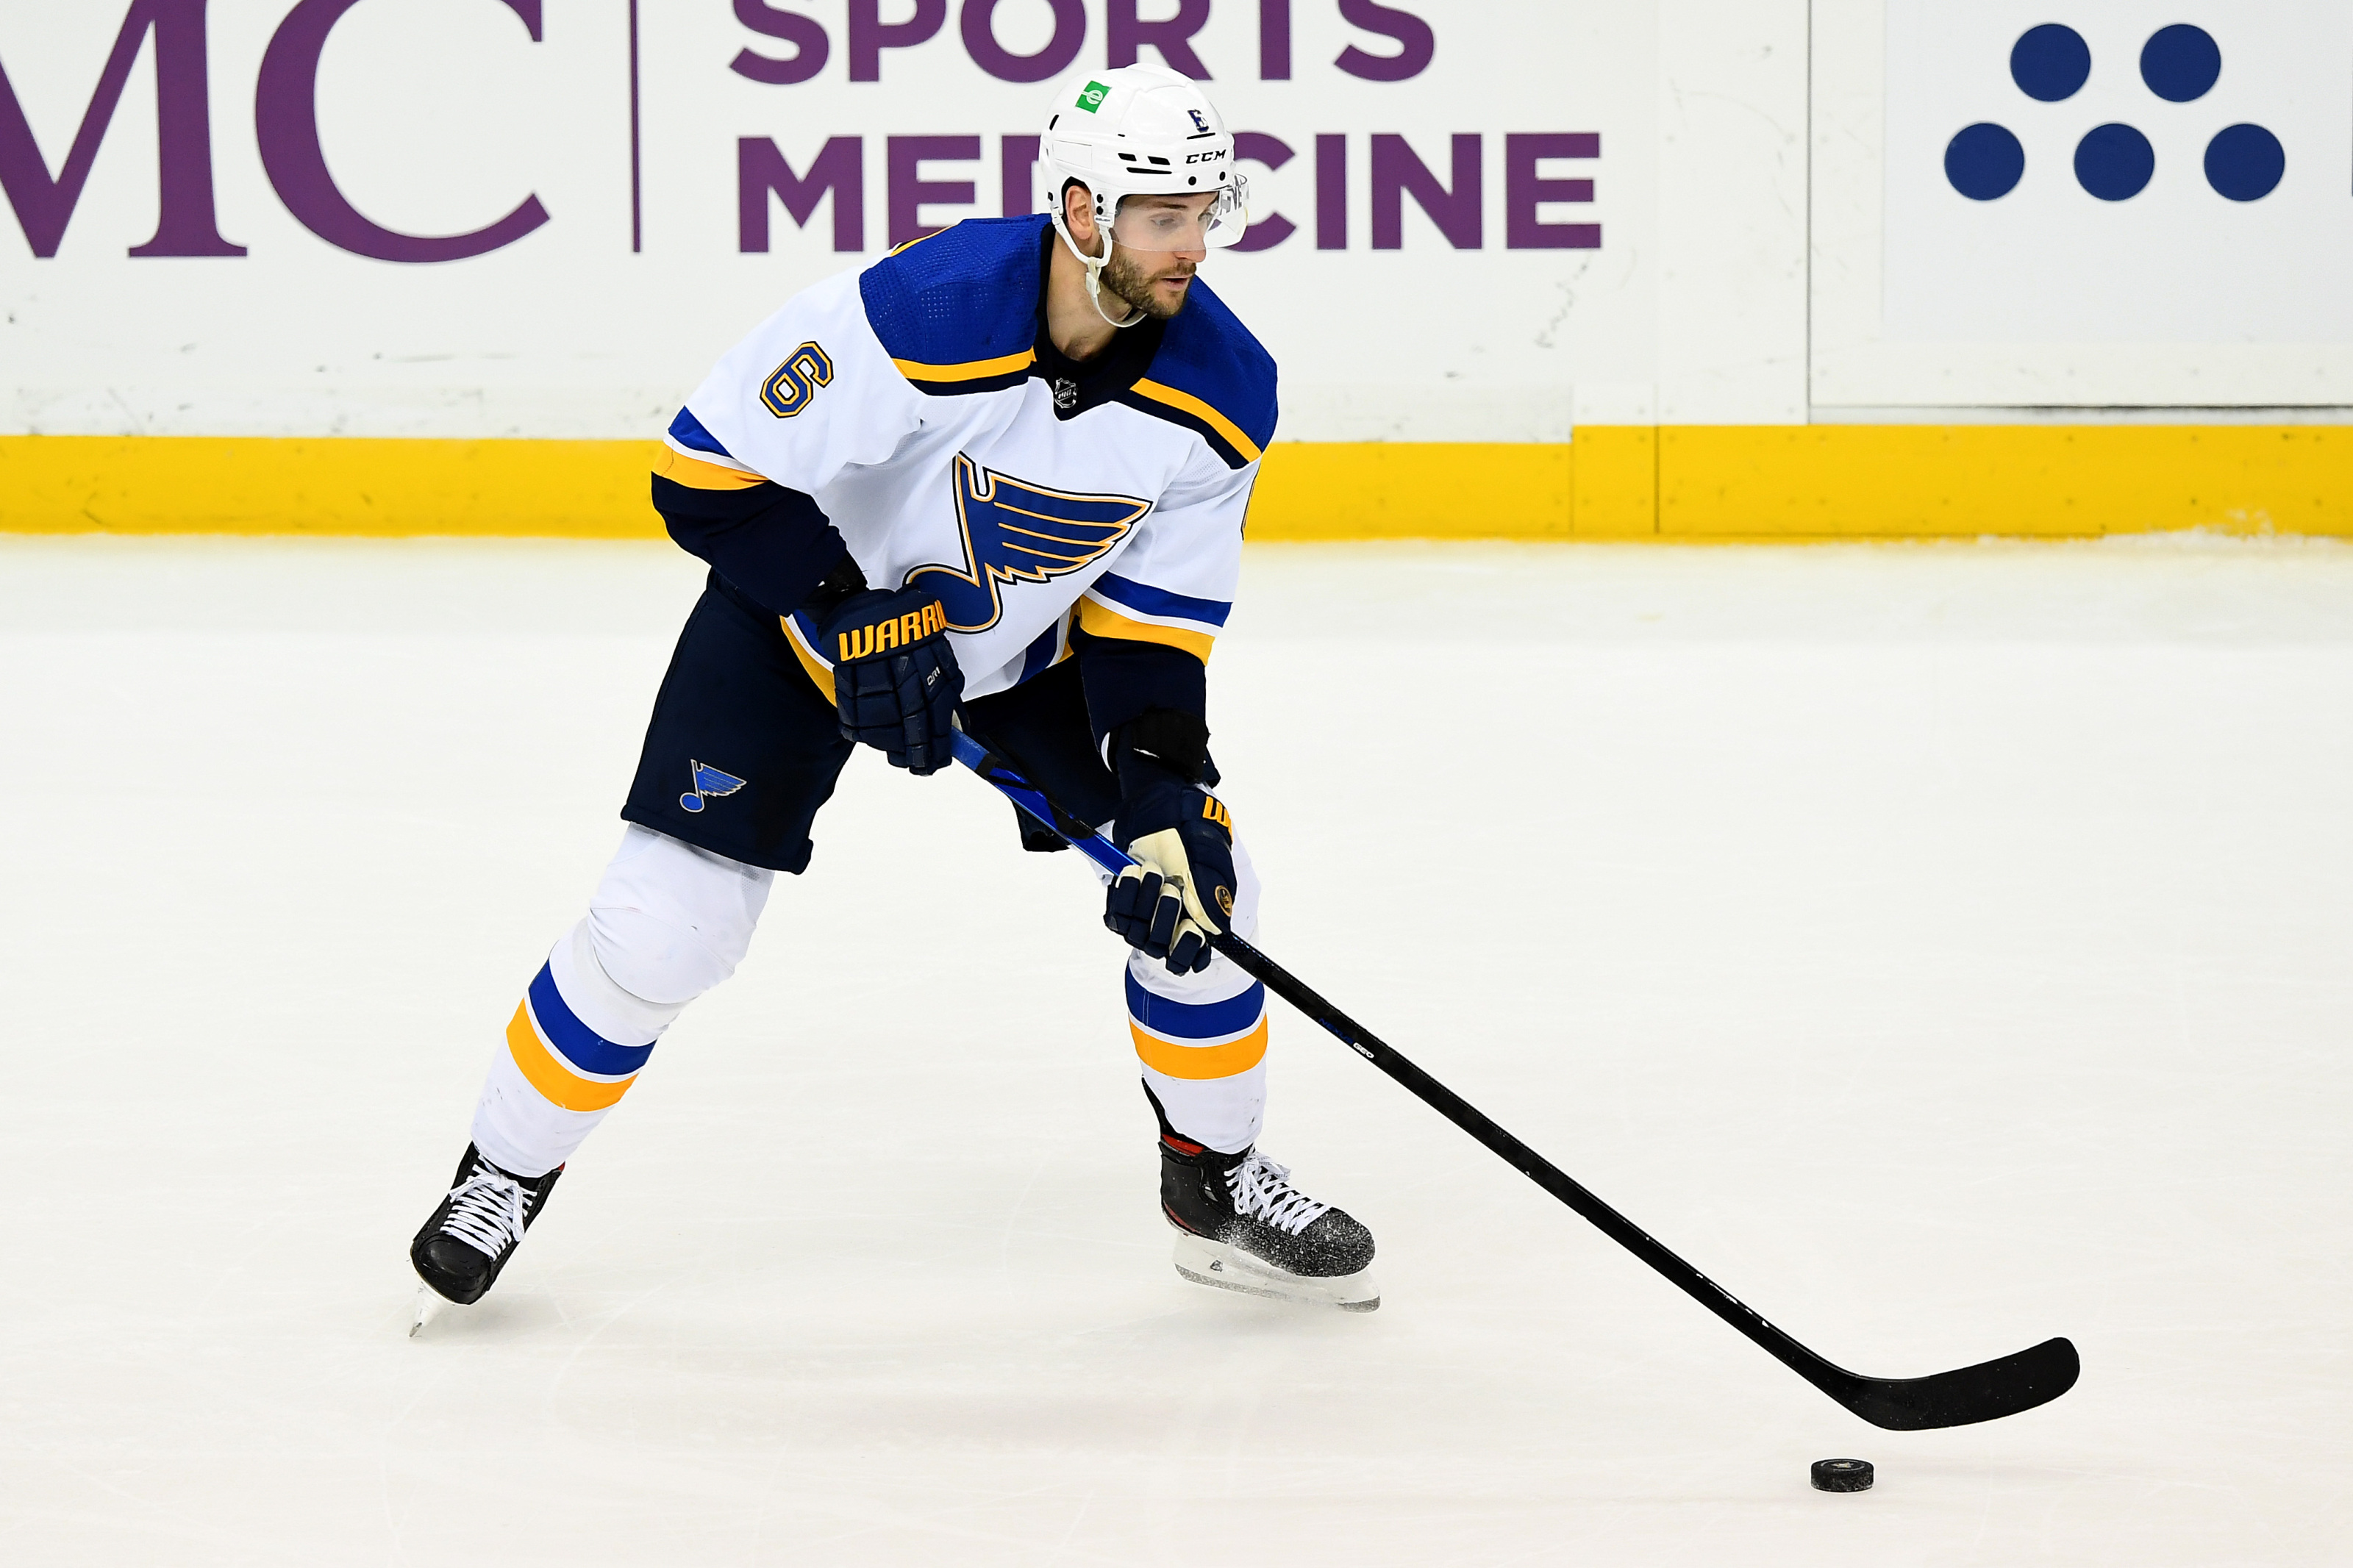 St. Louis Blues] Marco Scandella gets a high-stick to the face